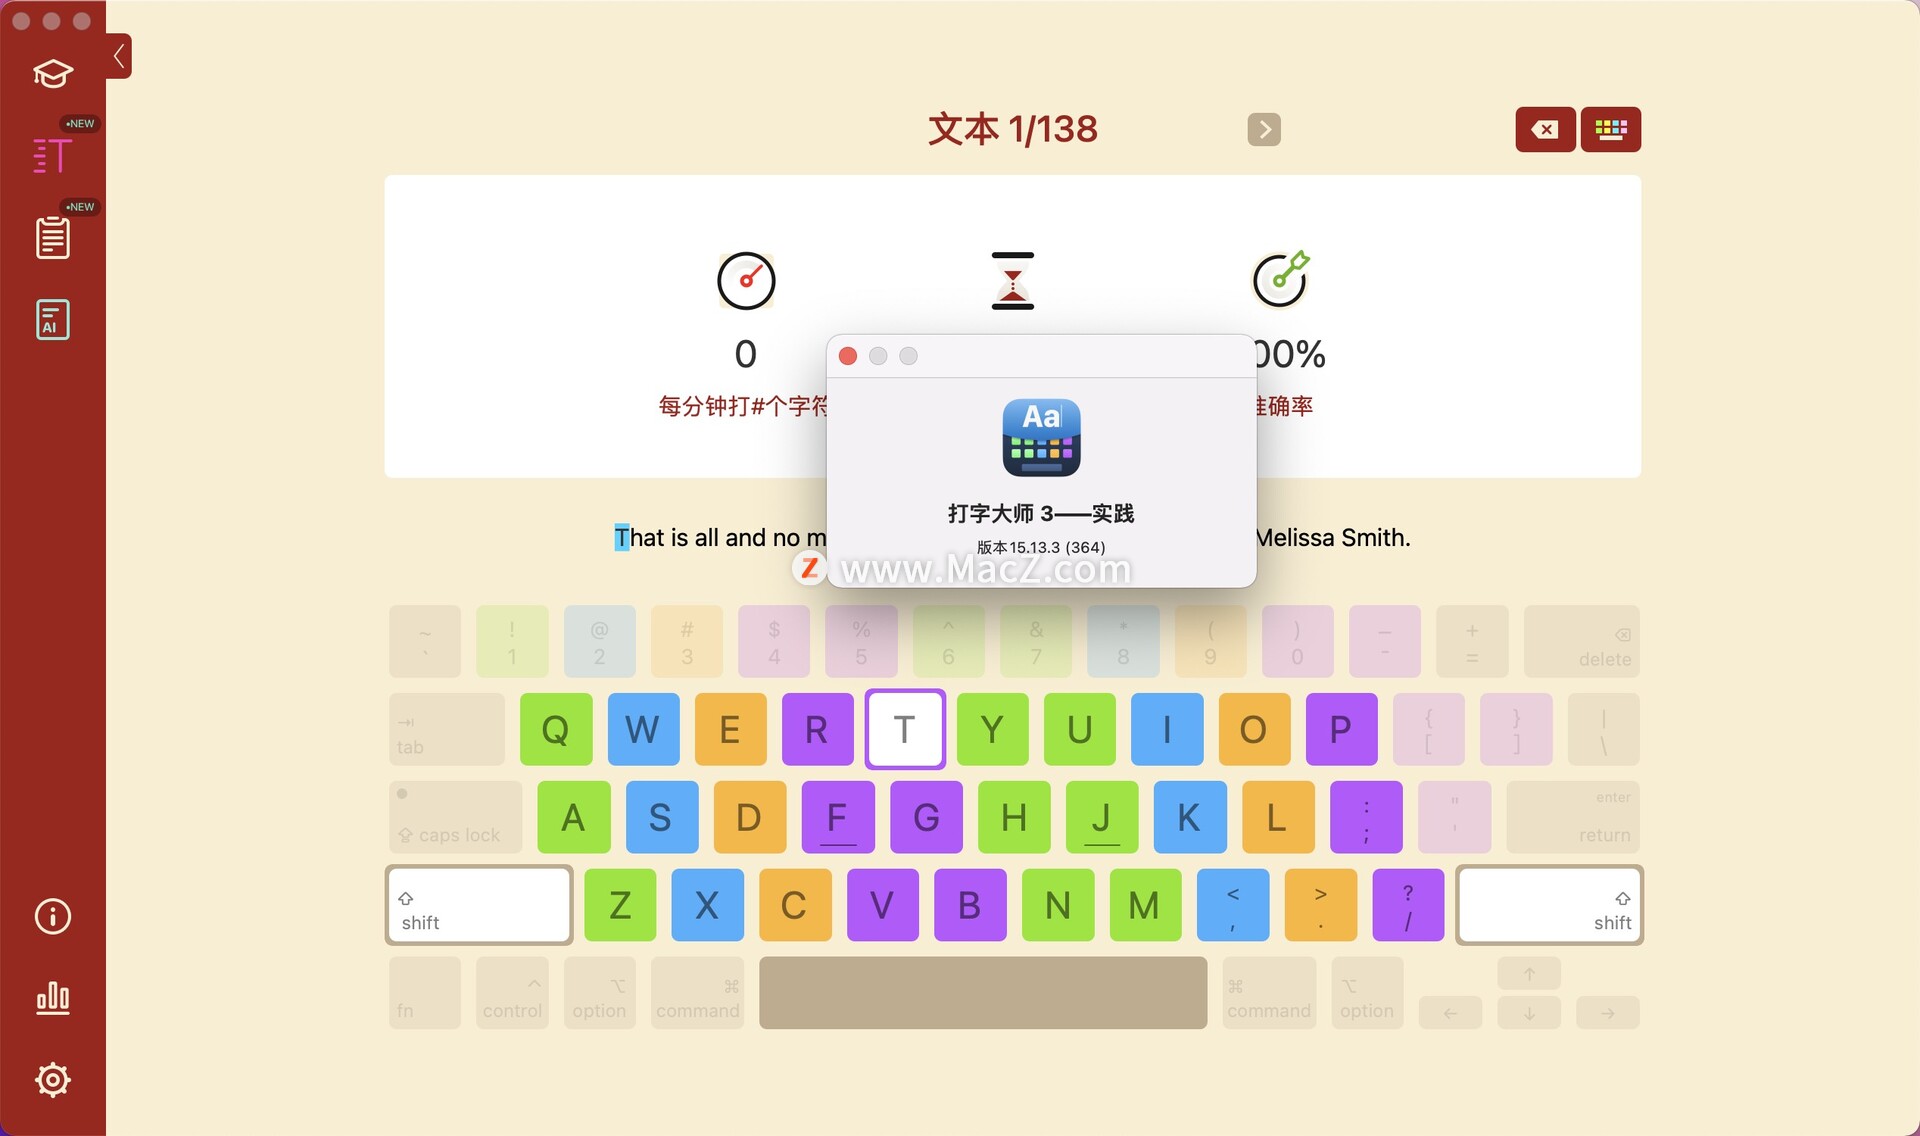 free for apple instal Master of Typing 3